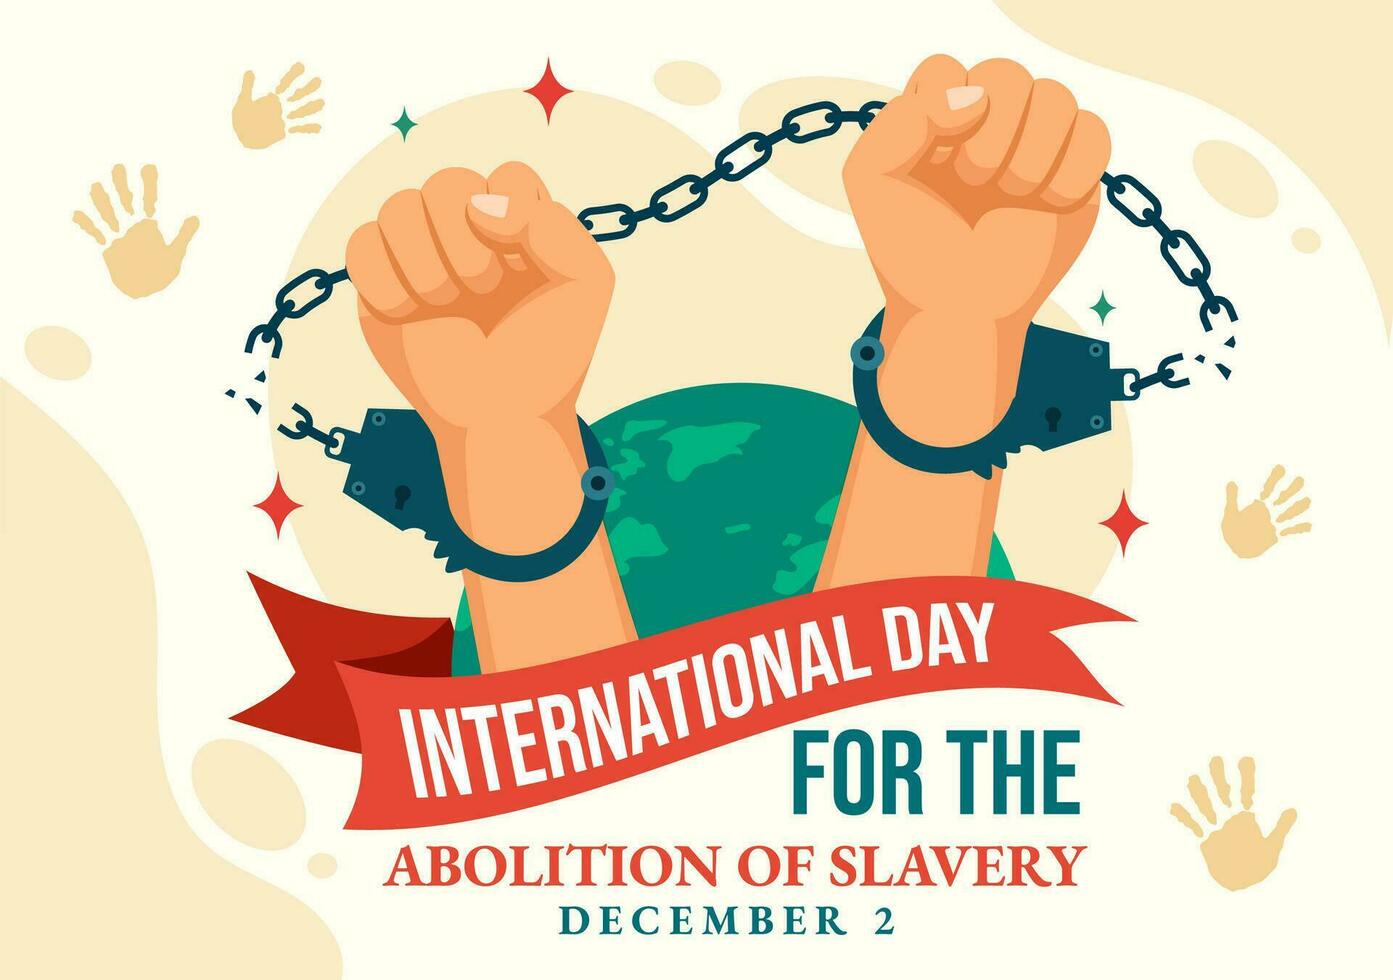 International Day for the Abolition of Slavery Vector Illustration on December 2 with Handcuffs, Chains, Pigeons and Hands in Flat Cartoon Background